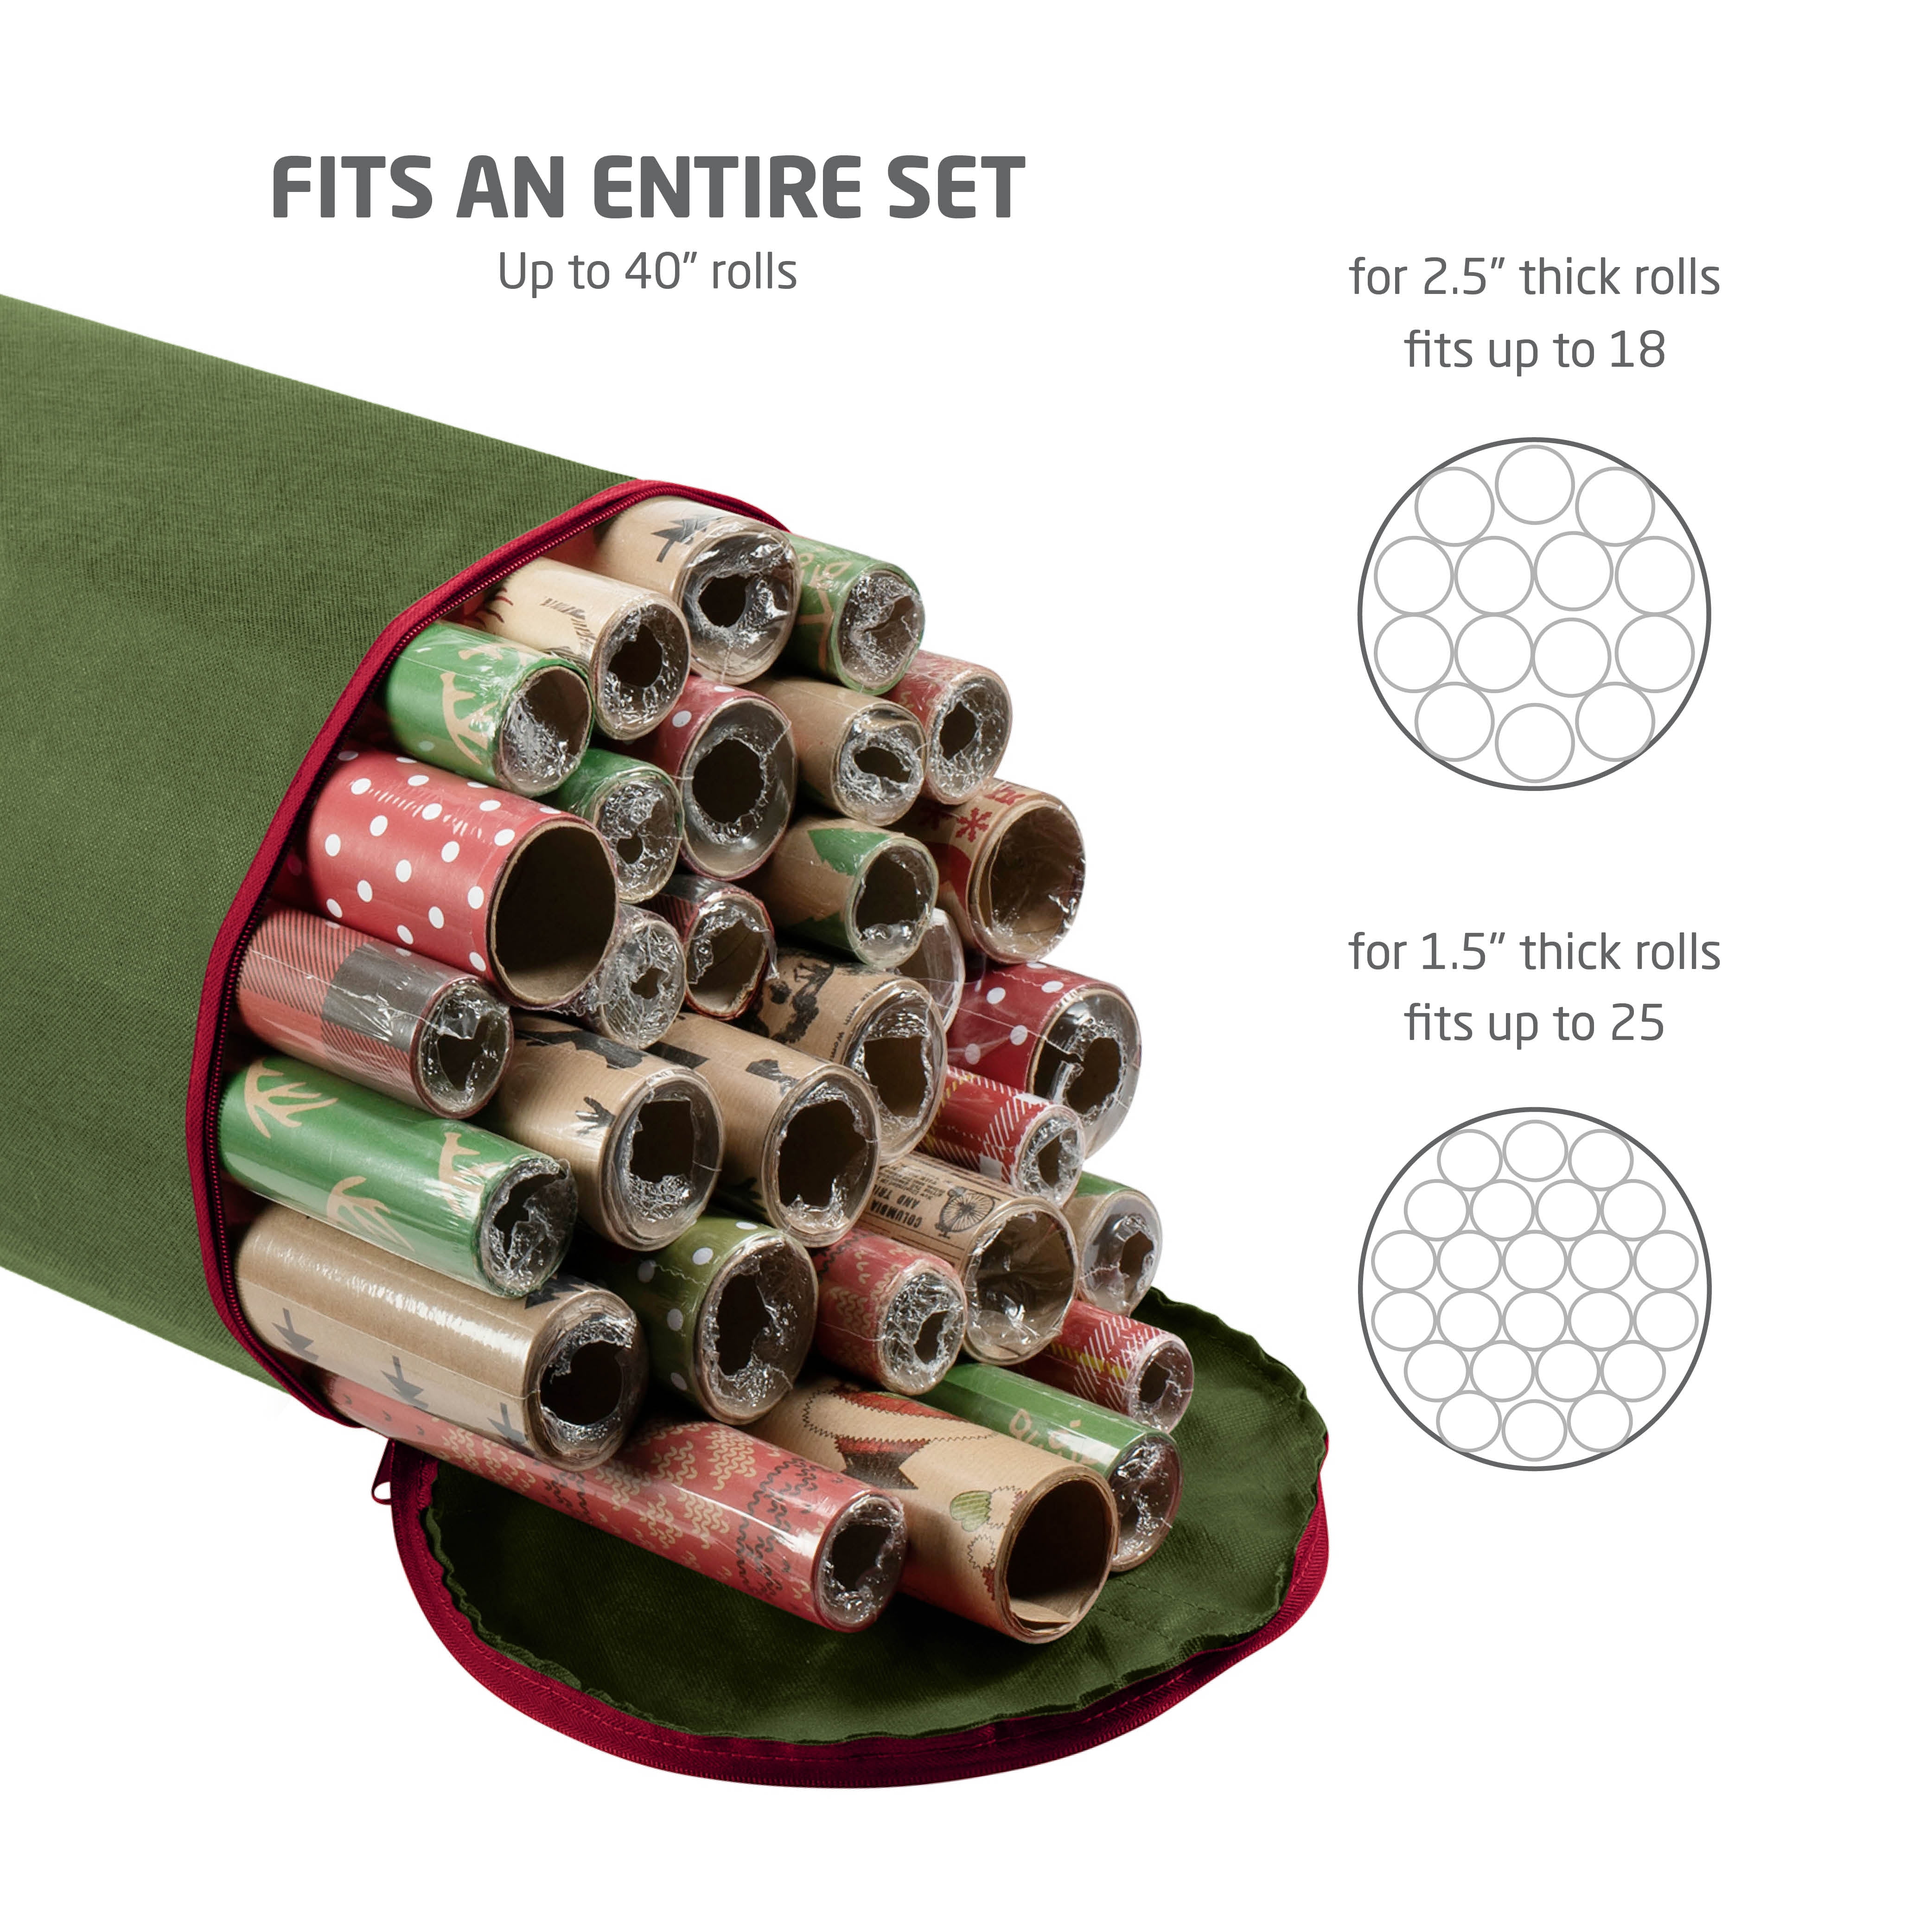 Wrapping Paper Organizer - Holds 20 Rolls of 30-Inch Christmas or Birthday  Wrap by Elf Stor (Red) - Bed Bath & Beyond - 20246727